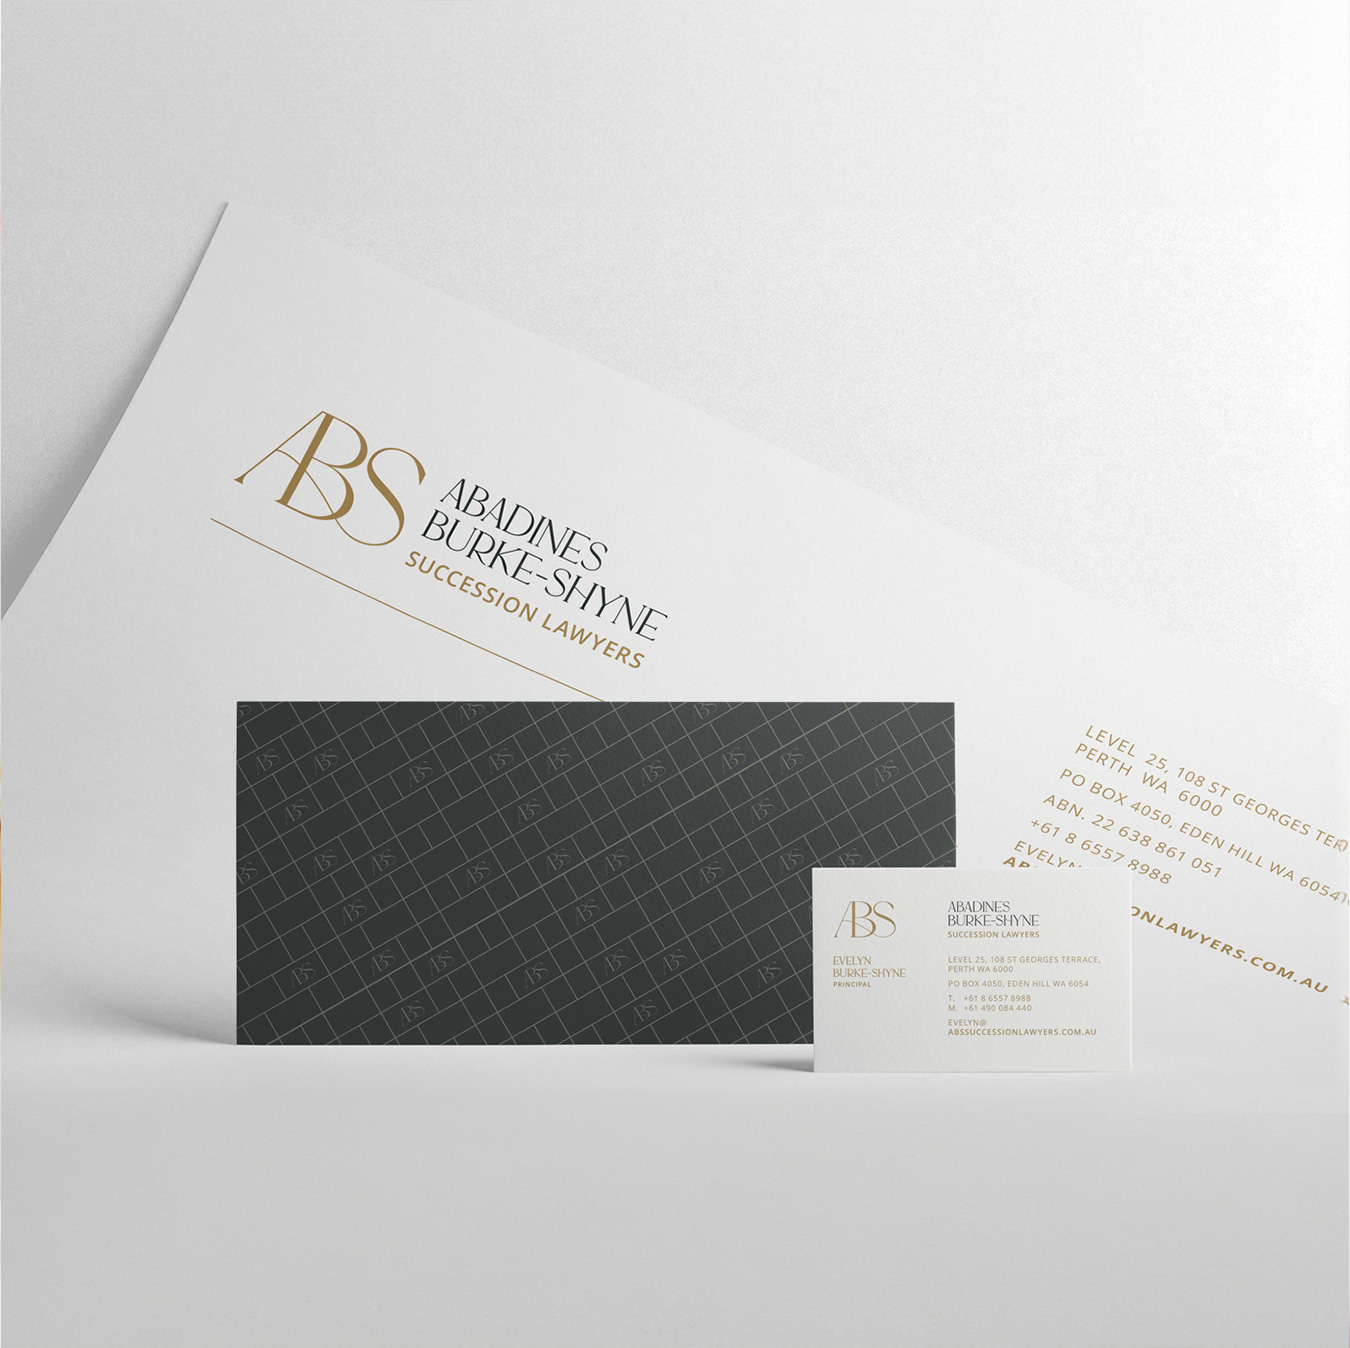 ABS Succession Lawyers Brand Development & Website Design by TL Design Co.